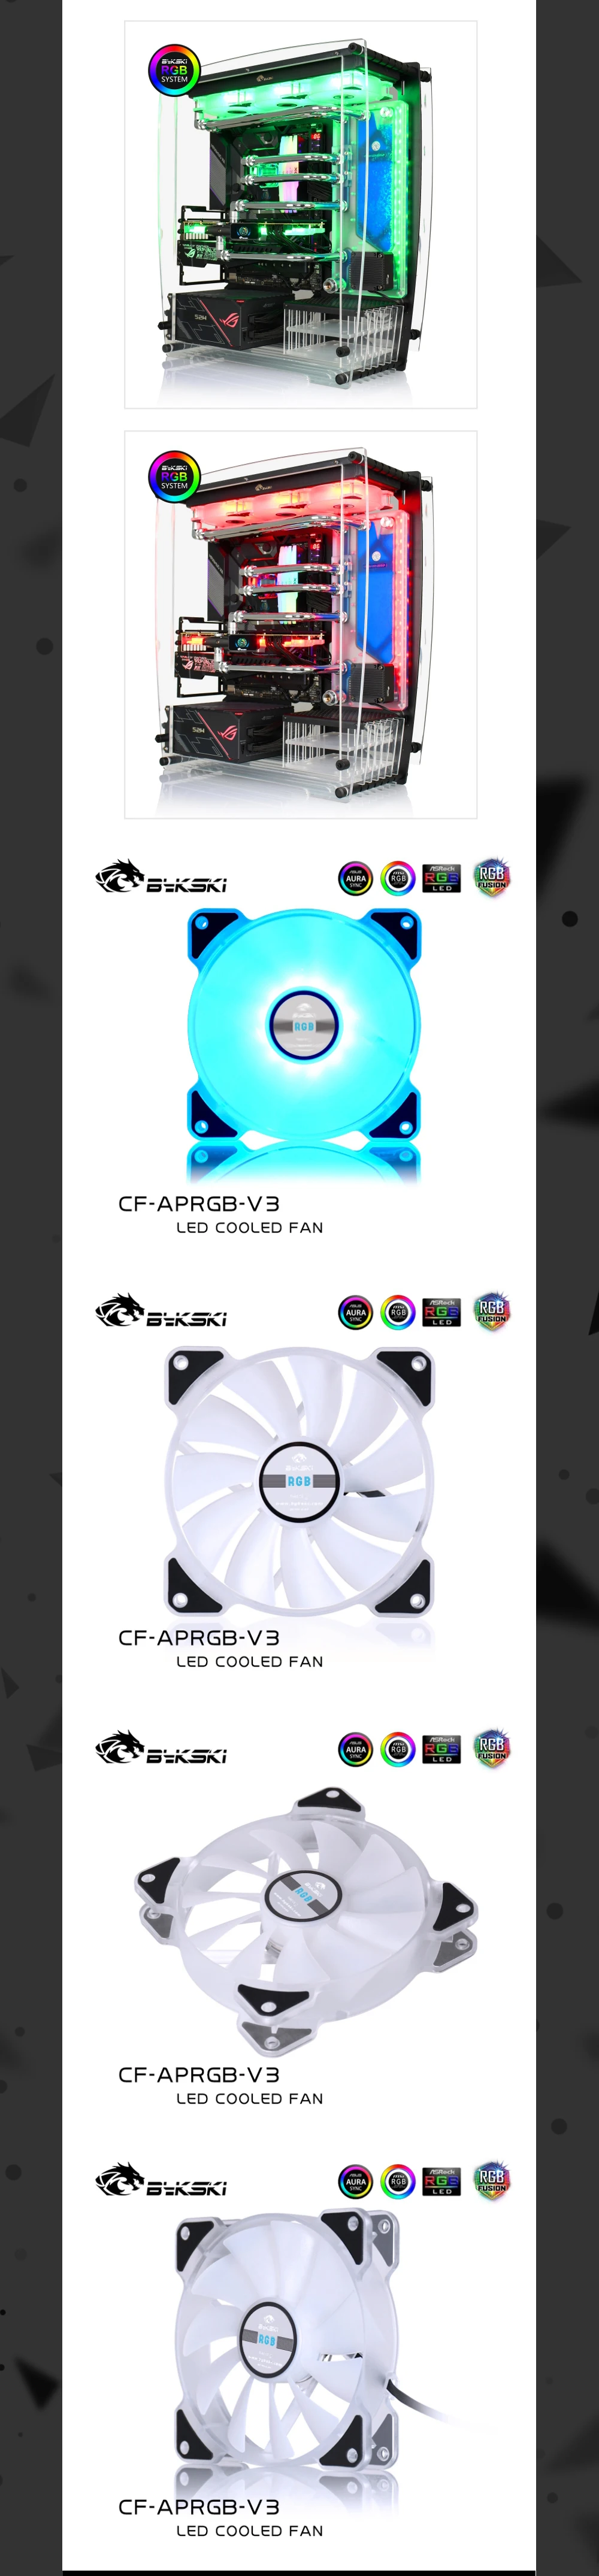 Bykski RGB 12v Computer Fan 120mm Mute Water Cooling Fan For PC Case 120/240/480 Radiator Colorful Cooler For PC Cooling CF-APRGB-V3  